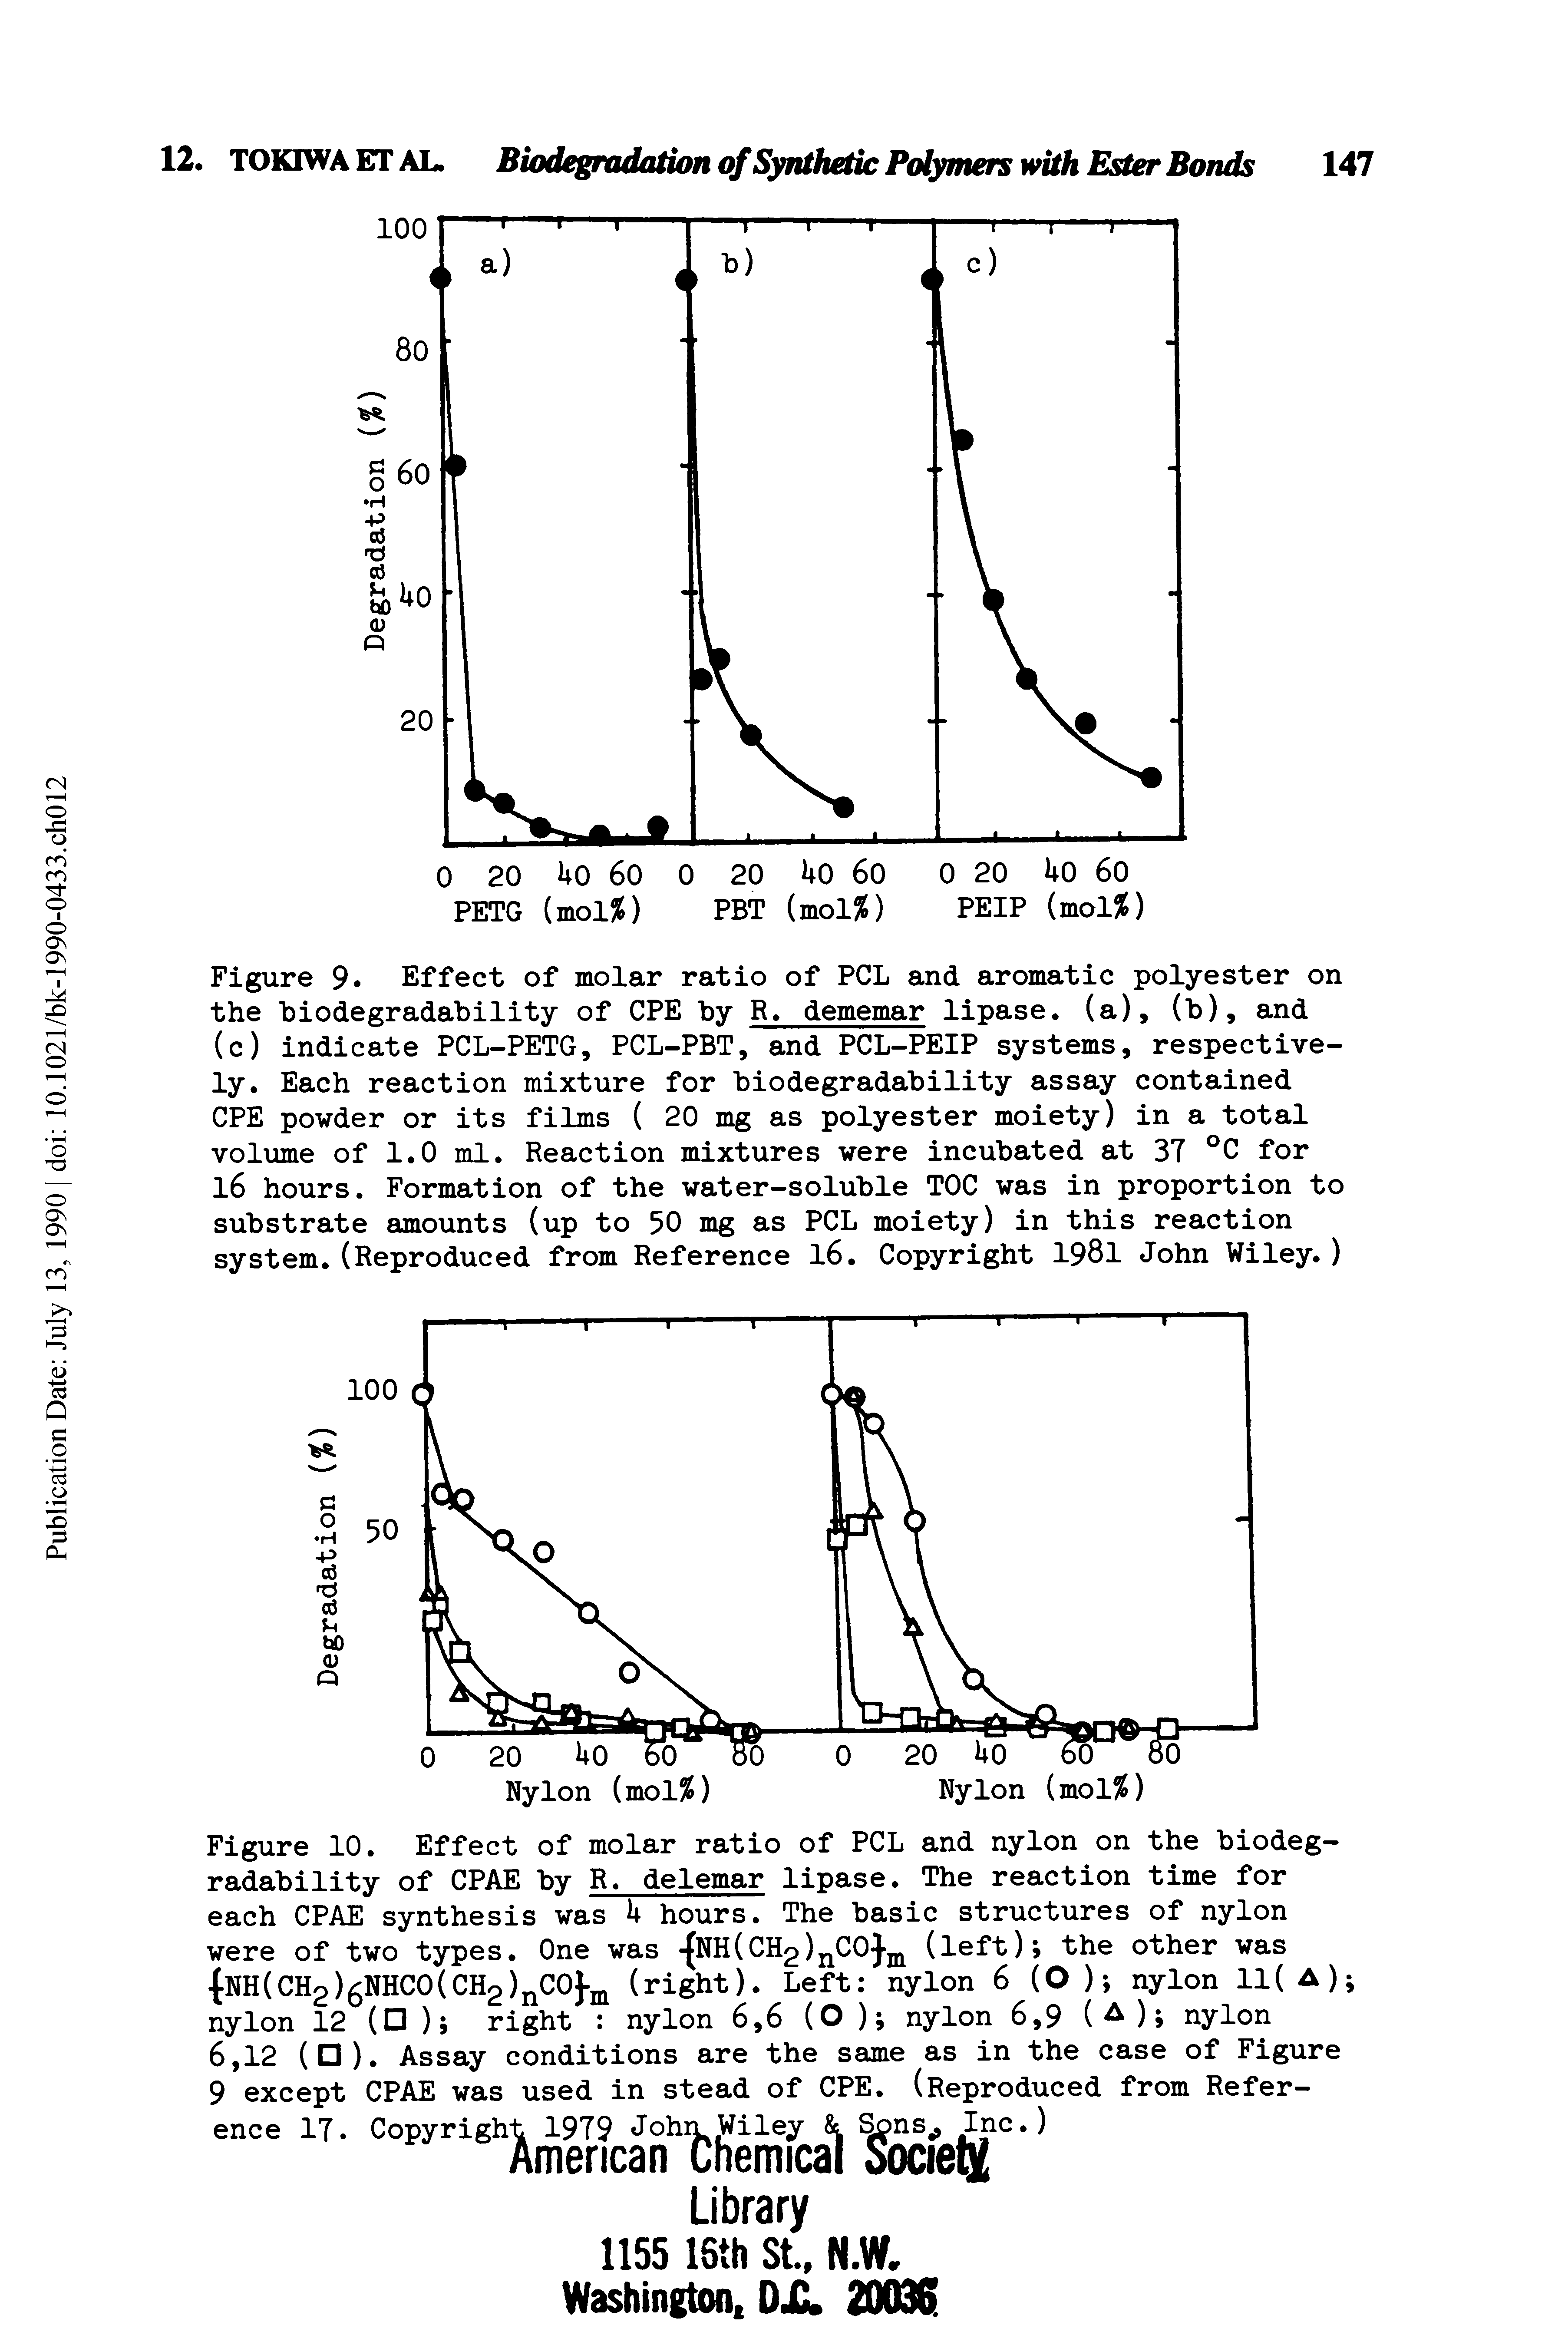 Figure 9 Effect of molar ratio of PCL and aromatic polyester on the biodegradability of CPE by R. dememar lipase, (a), (b), and (c) indicate PCL-PETG, PCL-PBT, and PCL-PEIP systems, respectively. Each reaction mixture for biodegradability assay contained CPE powder or its films ( 20 mg as polyester moiety) in a total volume of 1.0 ml. Reaction mixtures were incubated at 37 °C for l6 hours. Formation of the water-soluble TOC was in proportion to substrate amounts (up to 50 mg as PCL moiety) in this reaction system. (Reproduced from Reference l6. Copyright 1981 John Wiley. )...